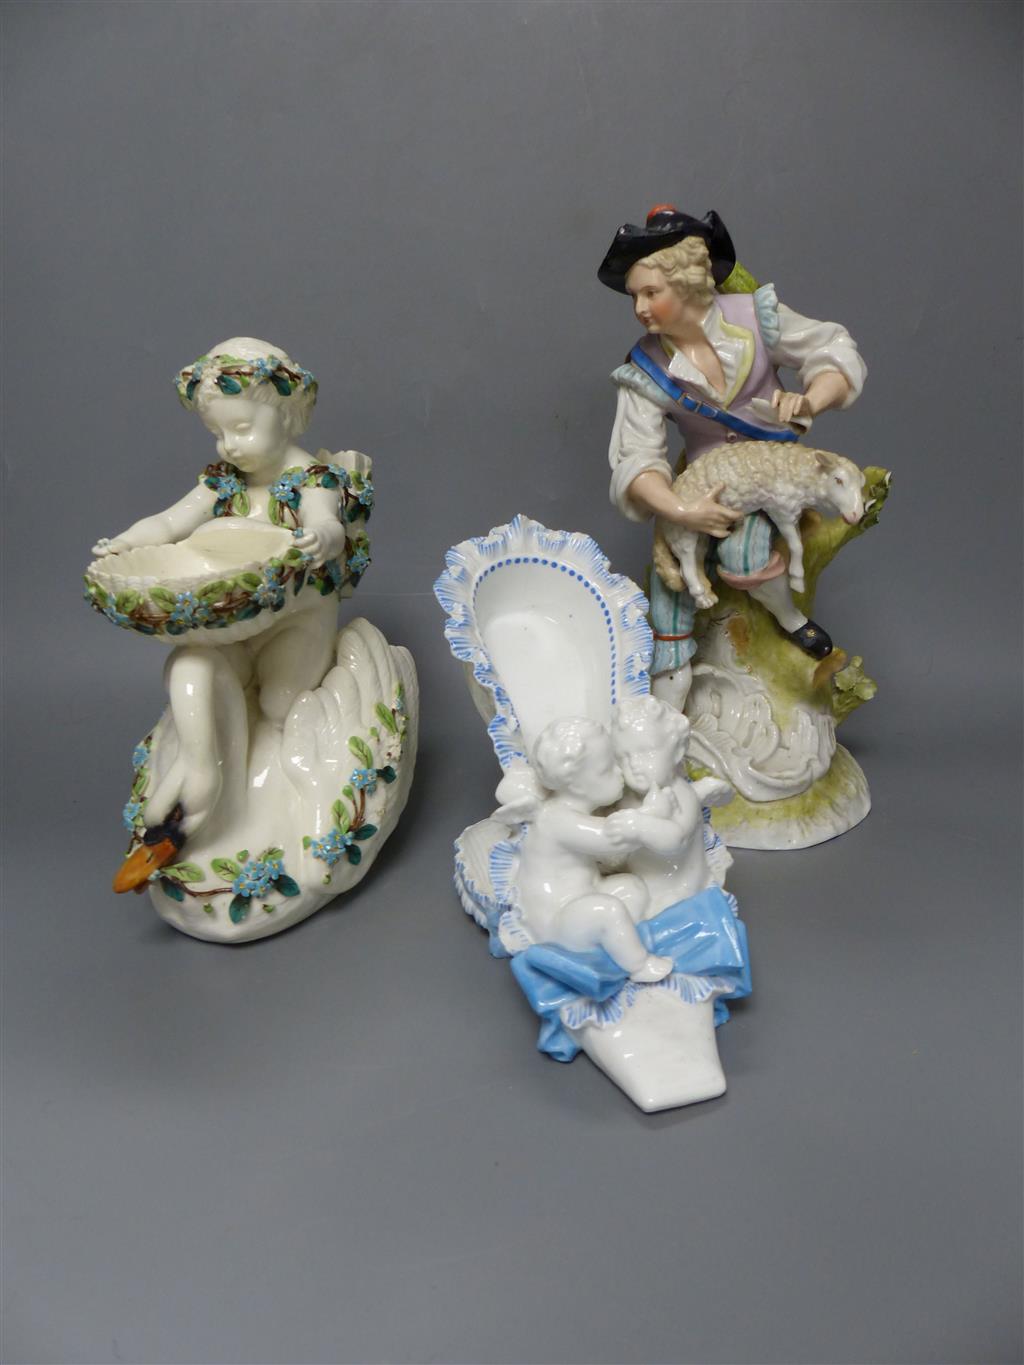 A French porcelain cherub shoe, a Continental porcelain cherub and swan dish and group of a shepherd, tallest 25.5cm